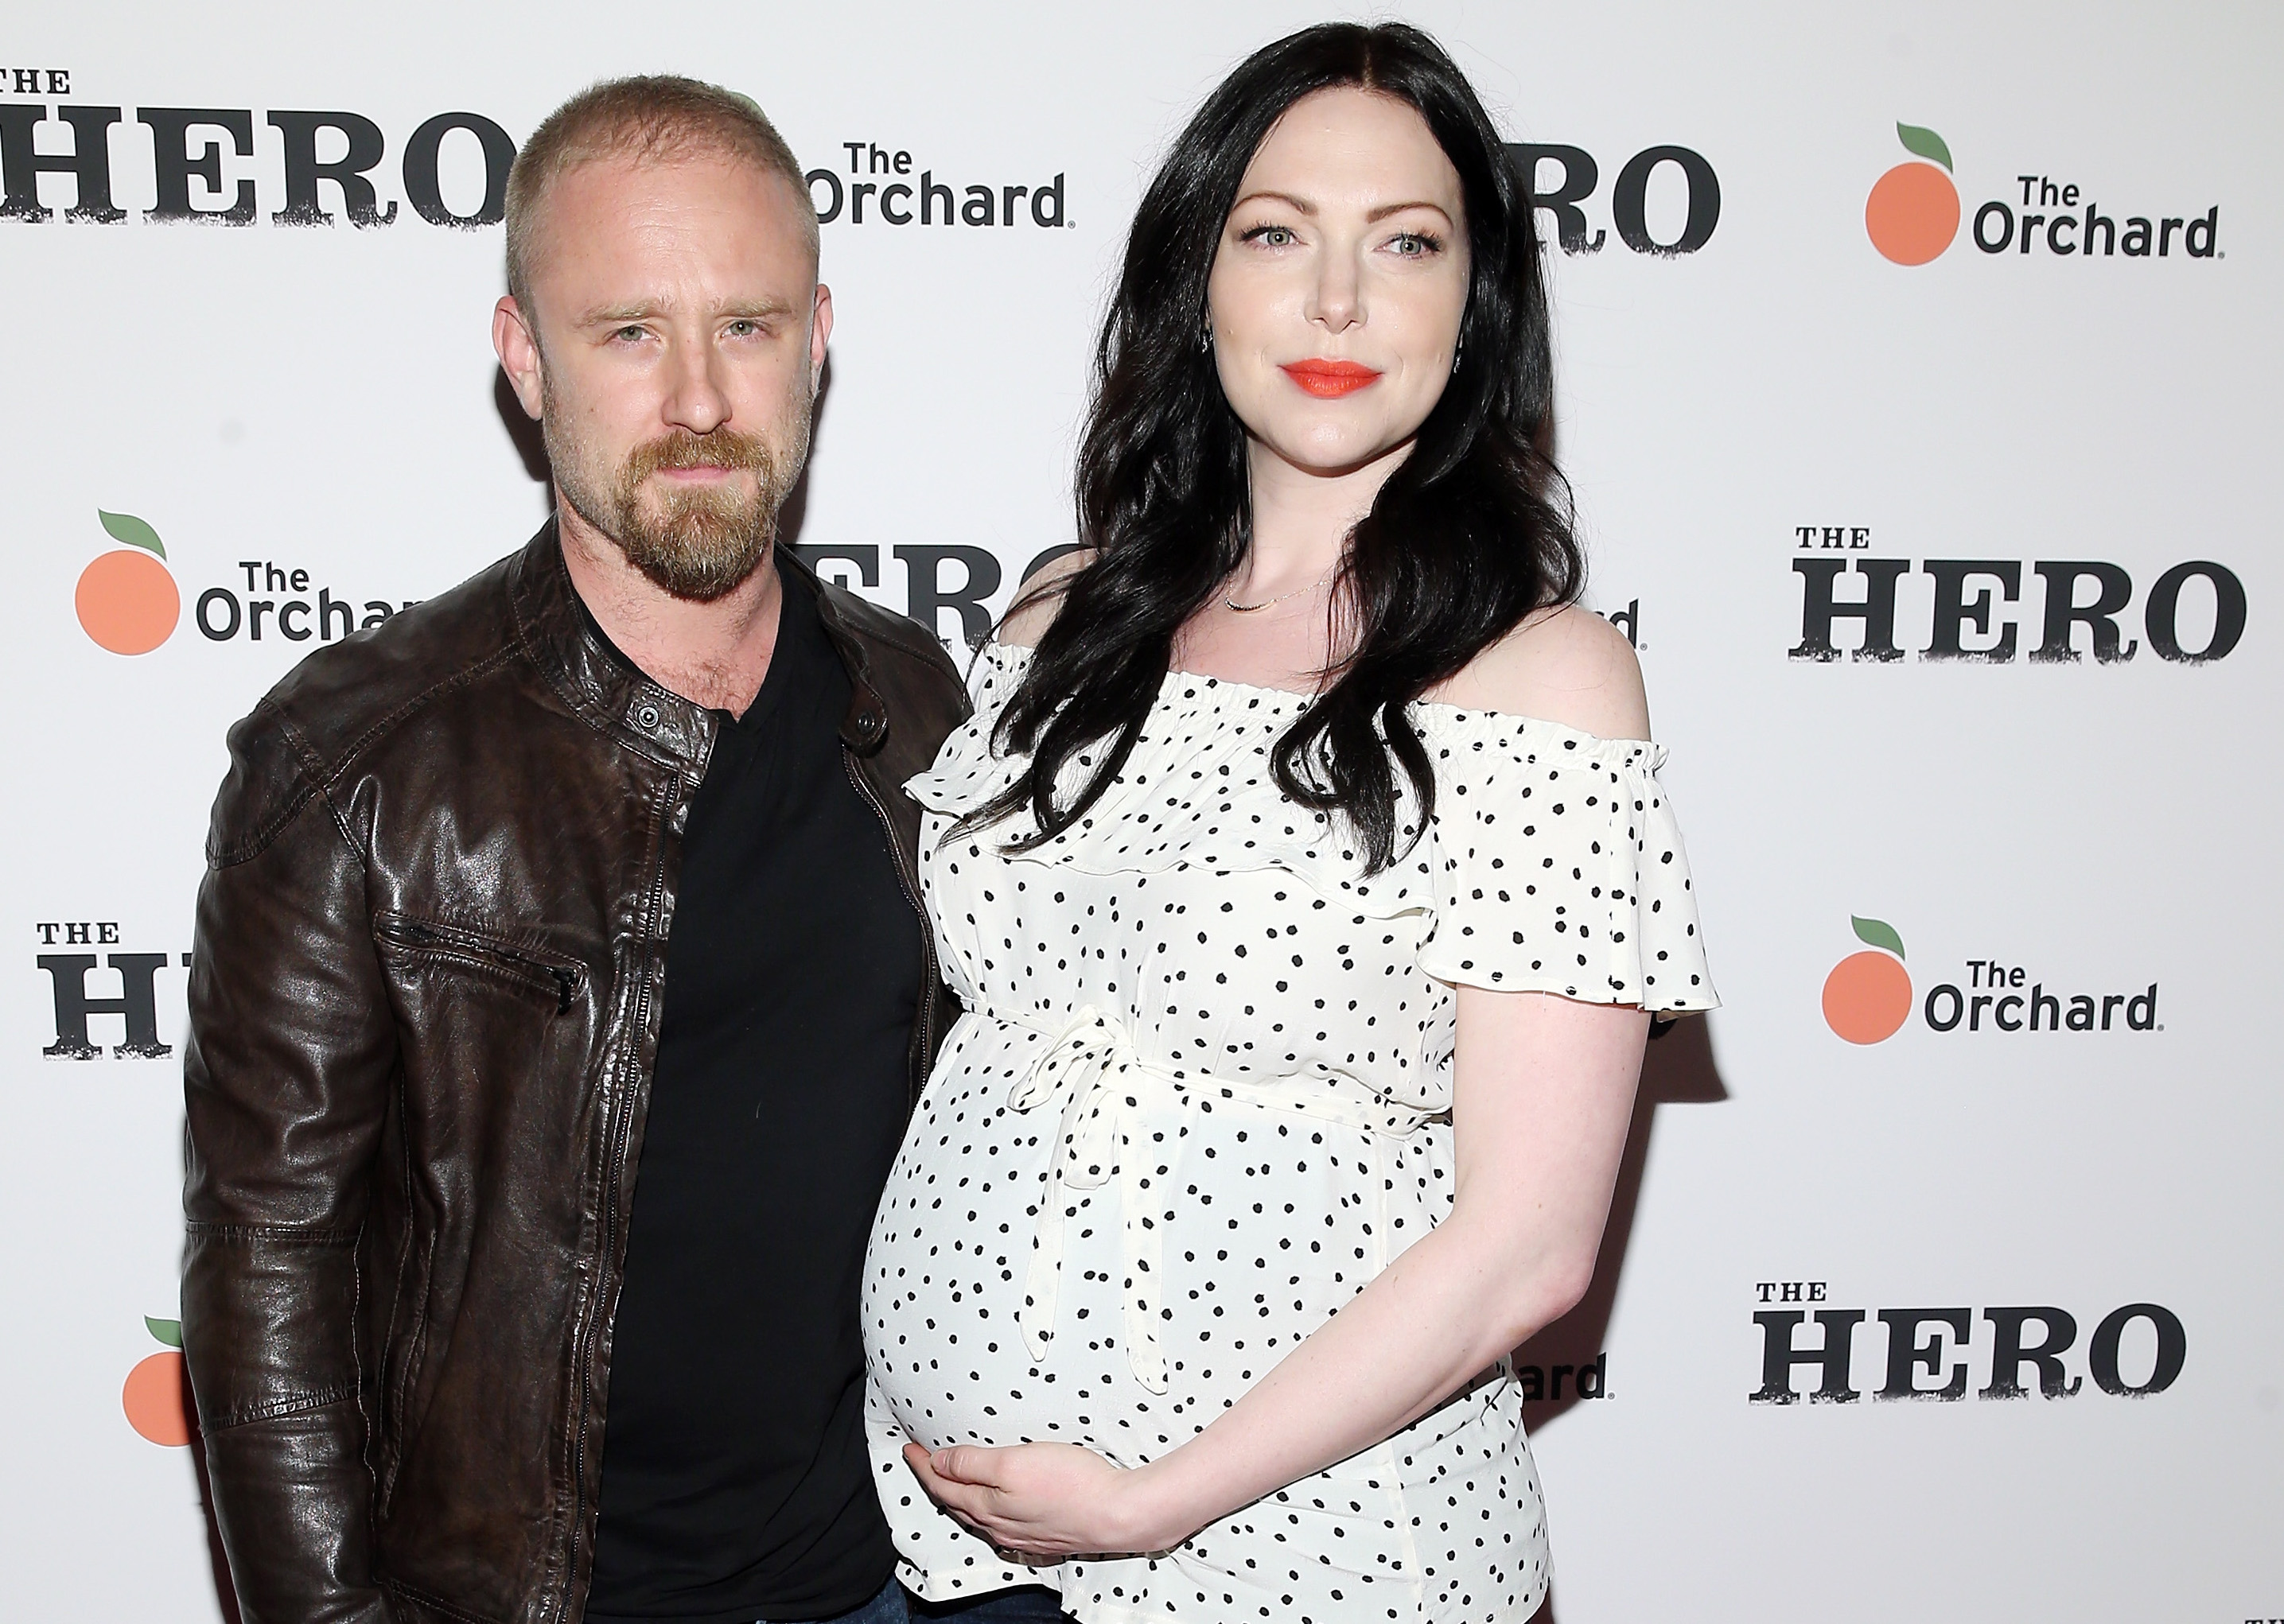 Laura Prepon Gives Birth to Her First Child With Ben Foster! (REPORT)